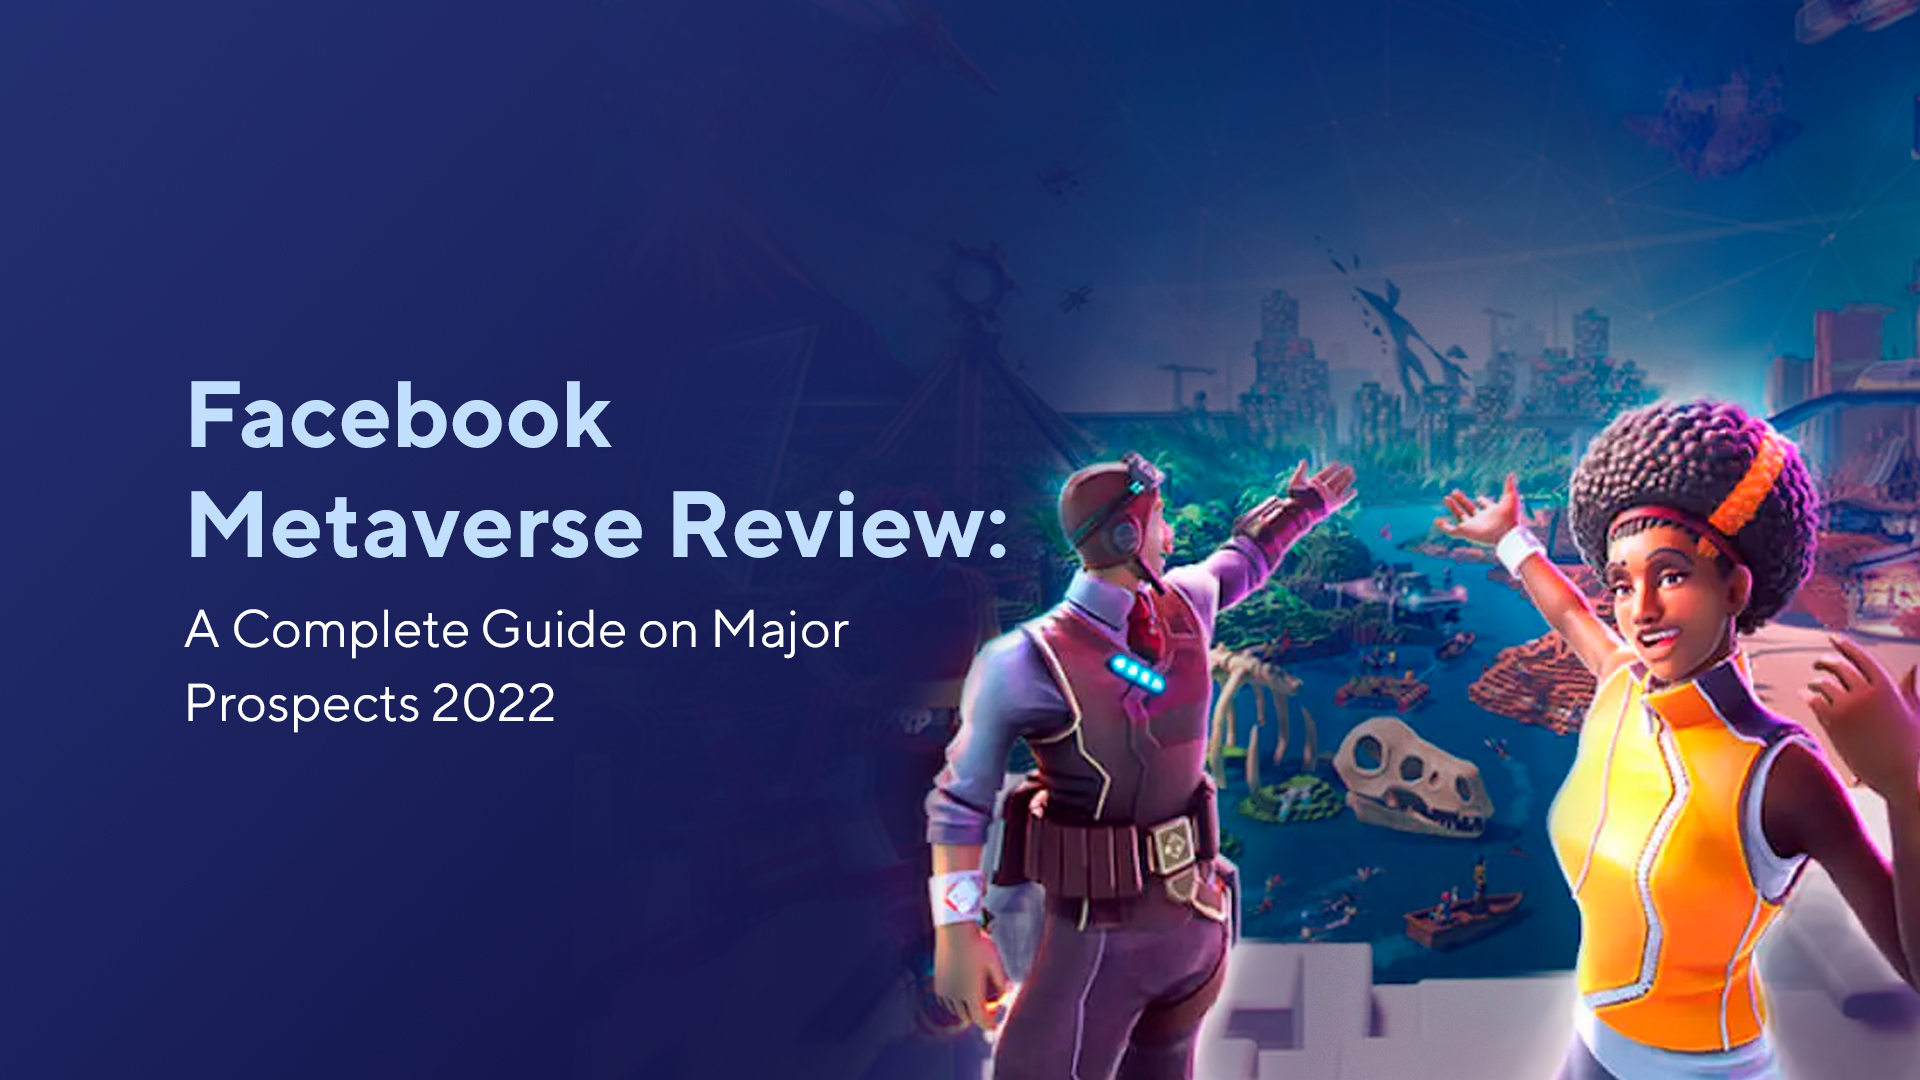 Facebook Metaverse Review: A Complete Guide on Major Prospects 2022